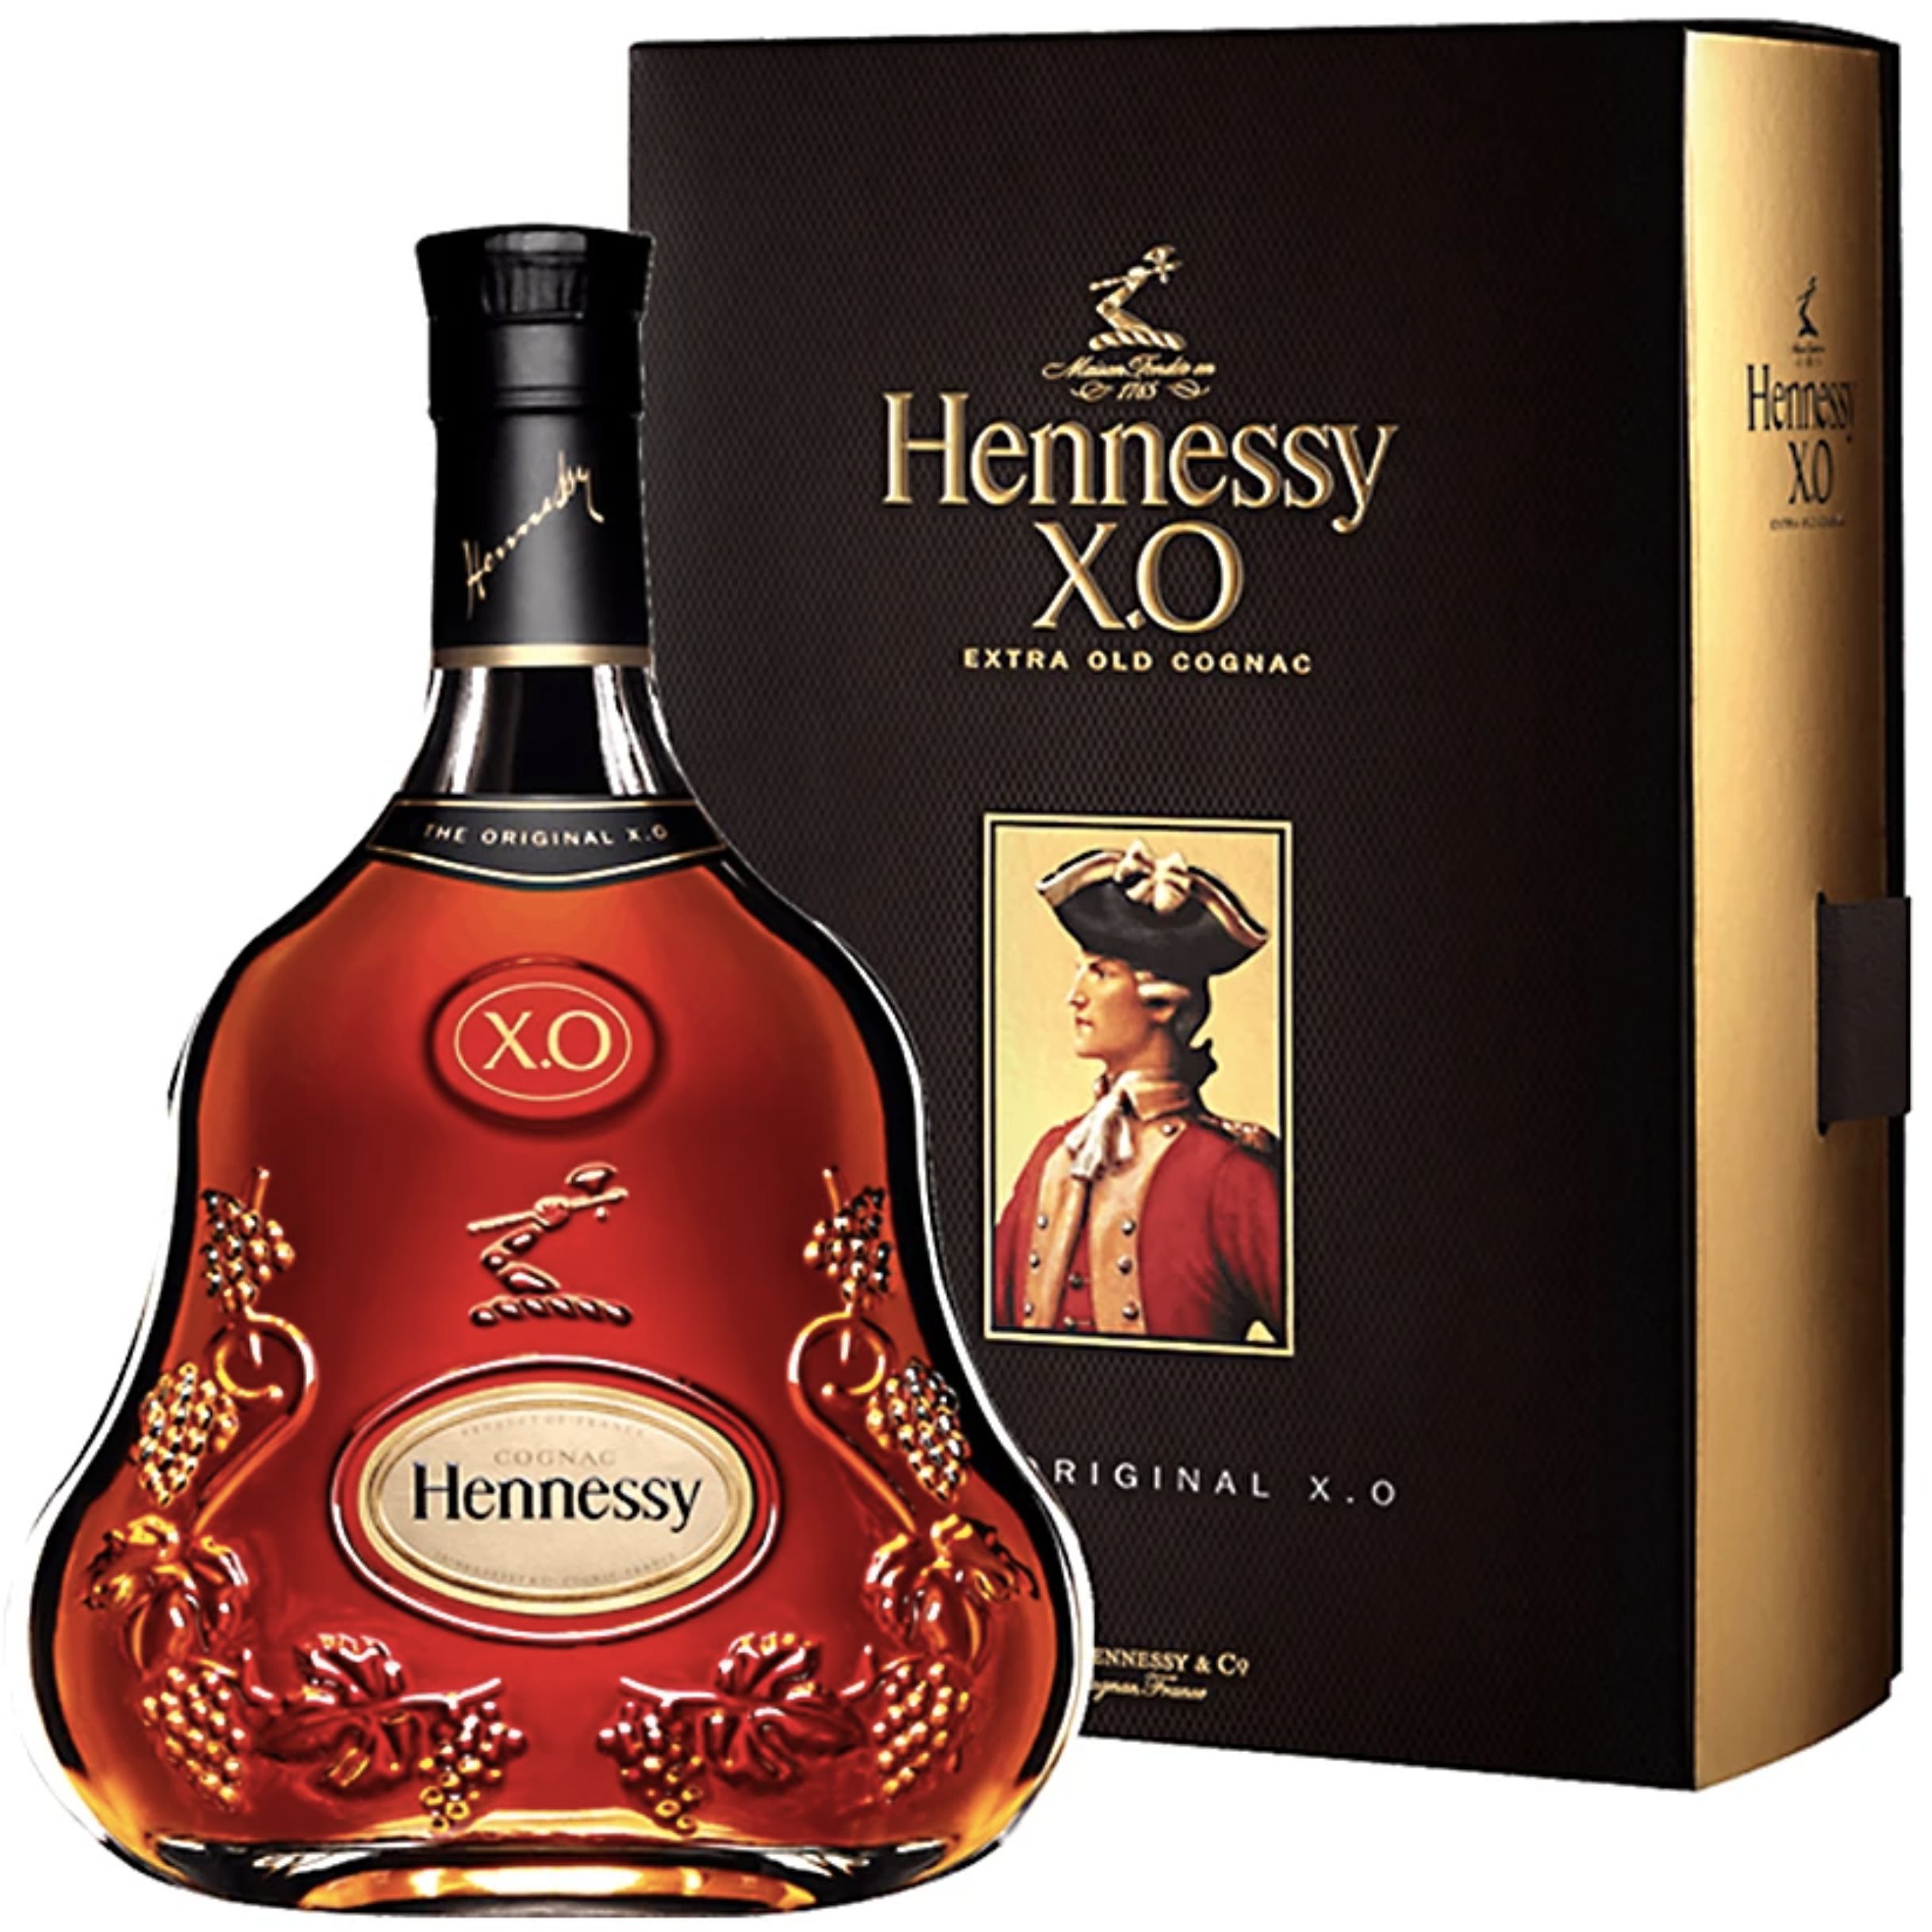 Hennessy x.o Extra old Cognac